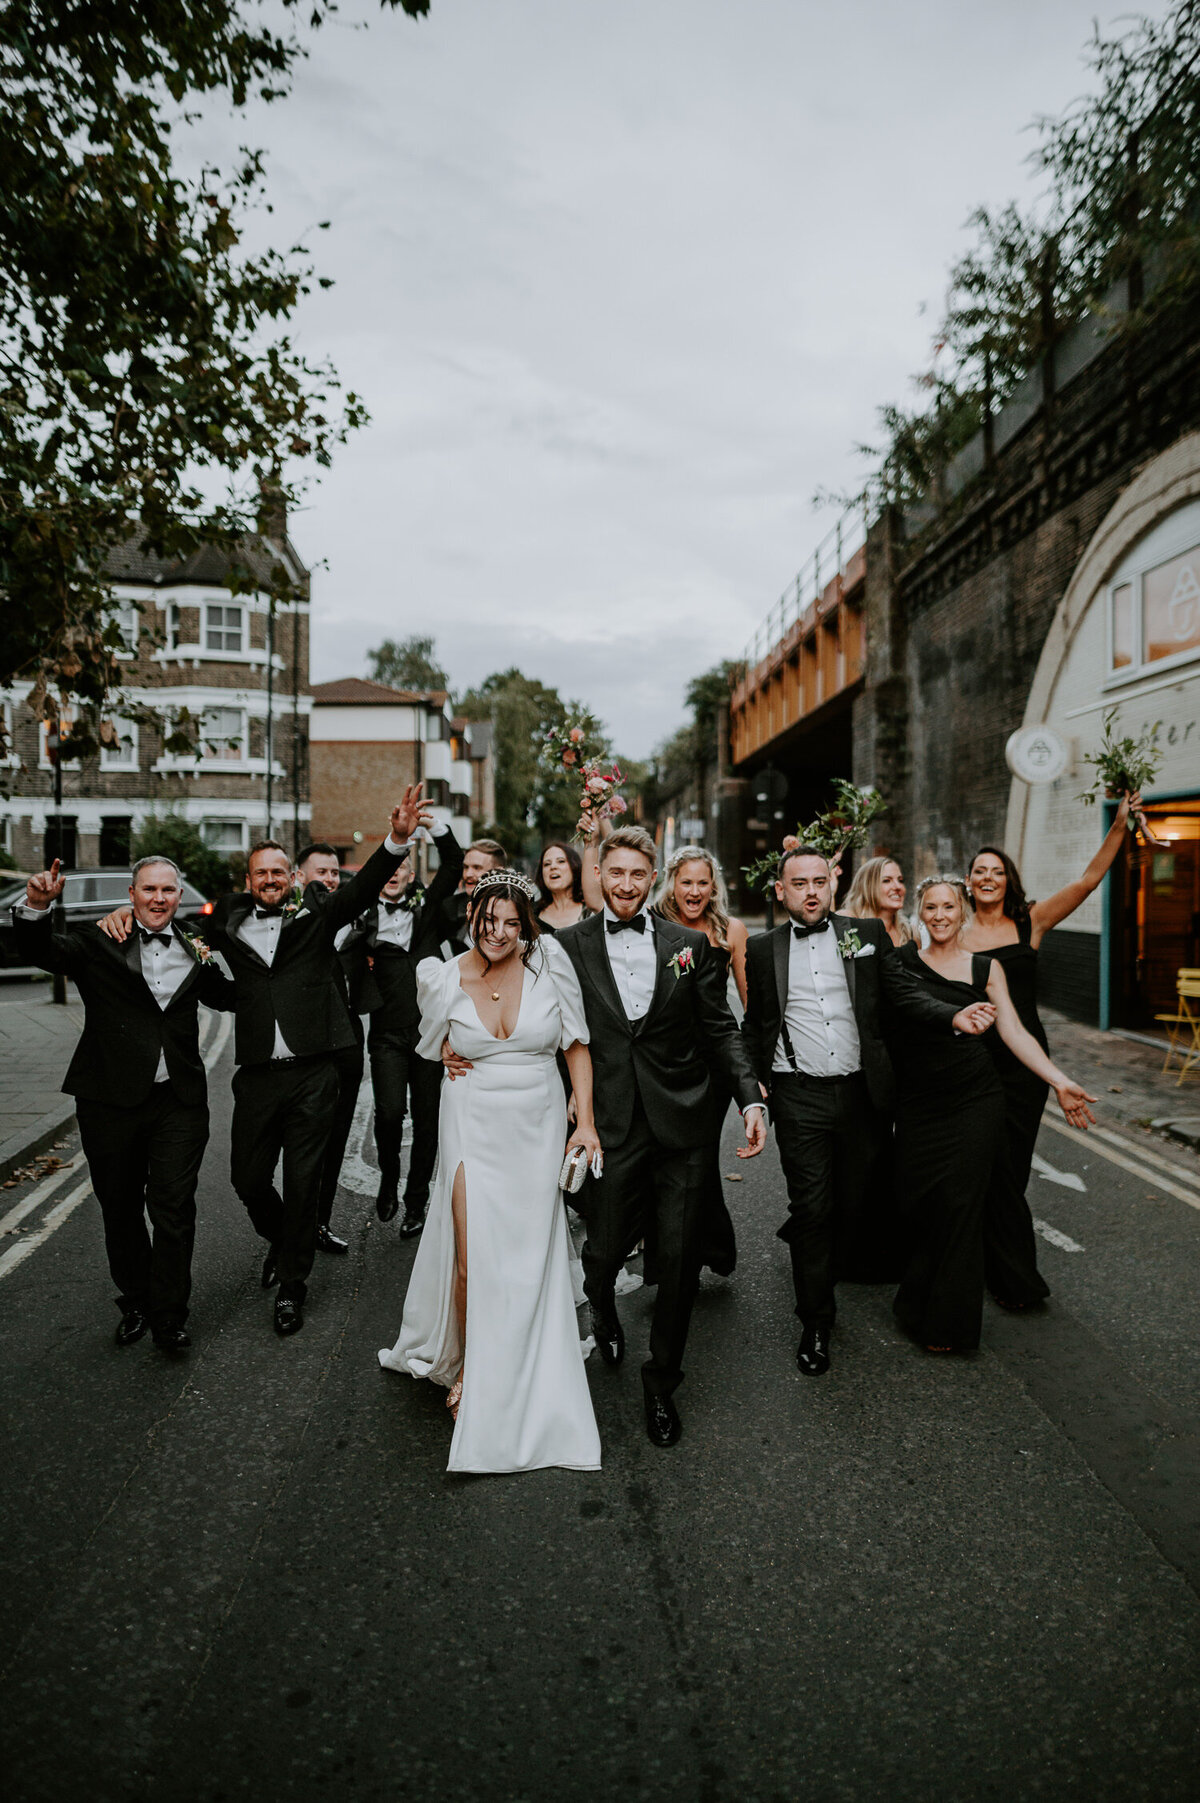 A bride and groom walk down the train bridges in Brixton followed by their wedding party after their speeches at 100 Barrington.